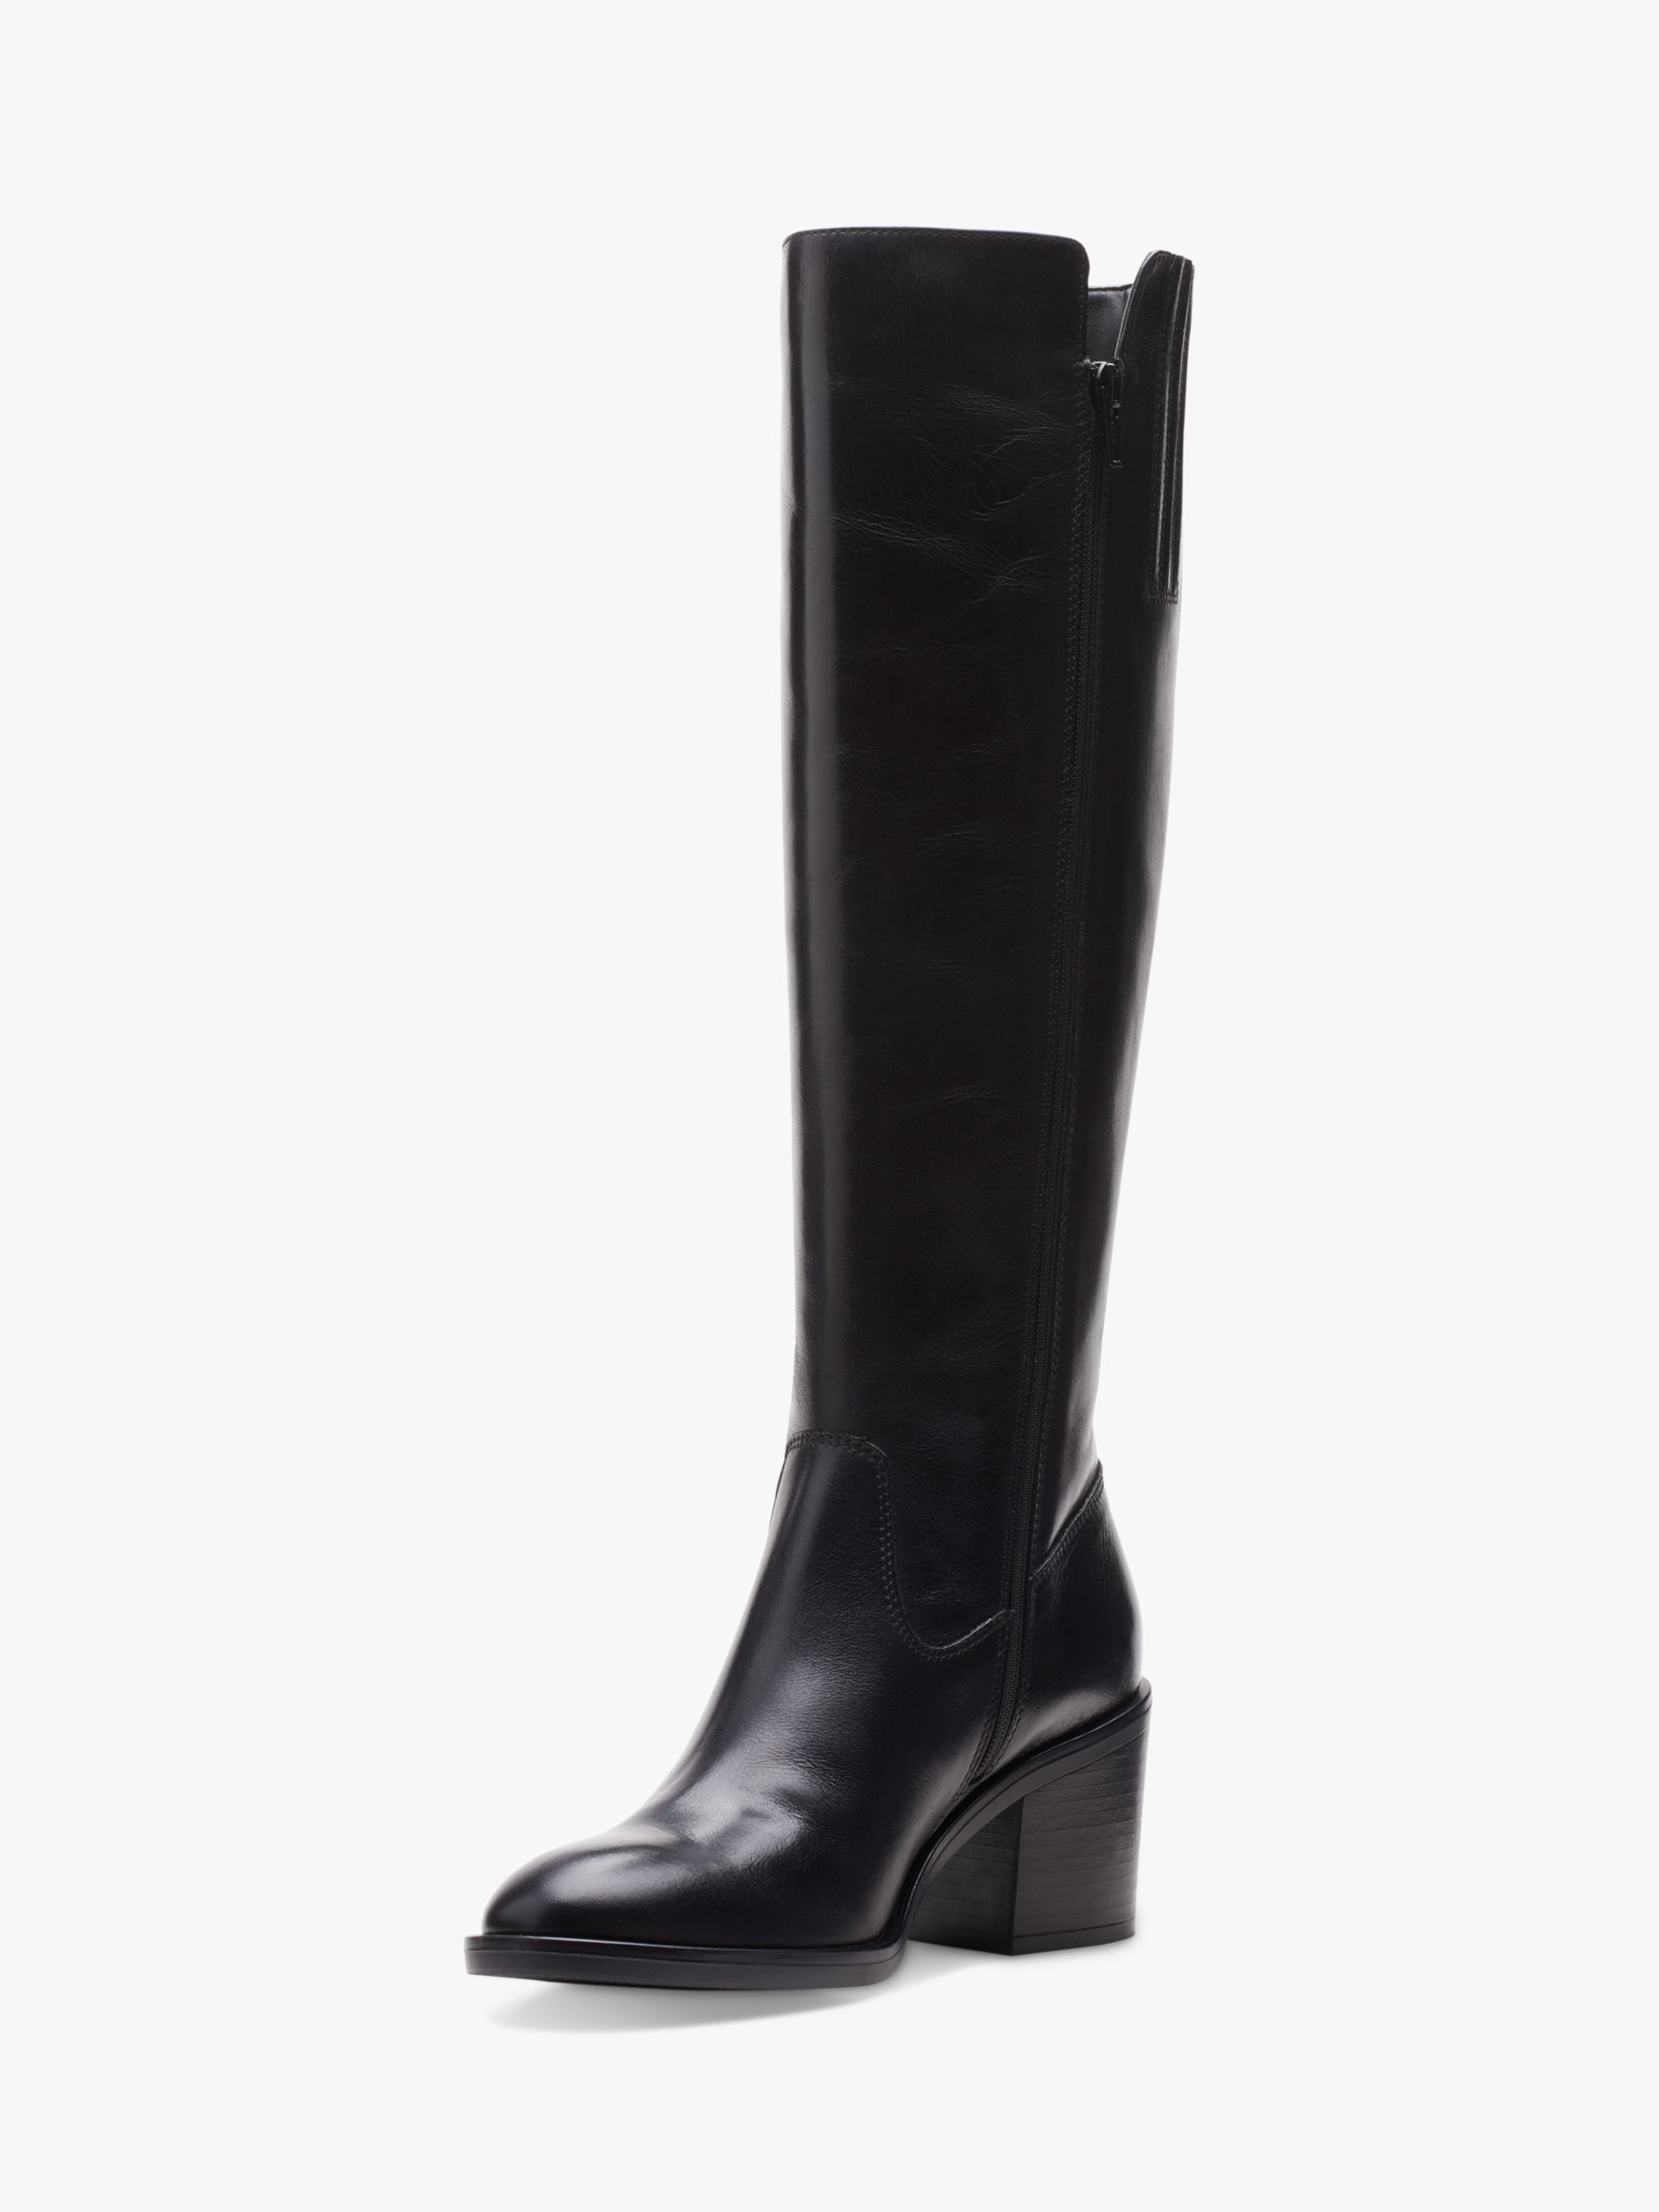 Clarks Valvestino Leather Knee High Boots, Black at John Lewis & Partners